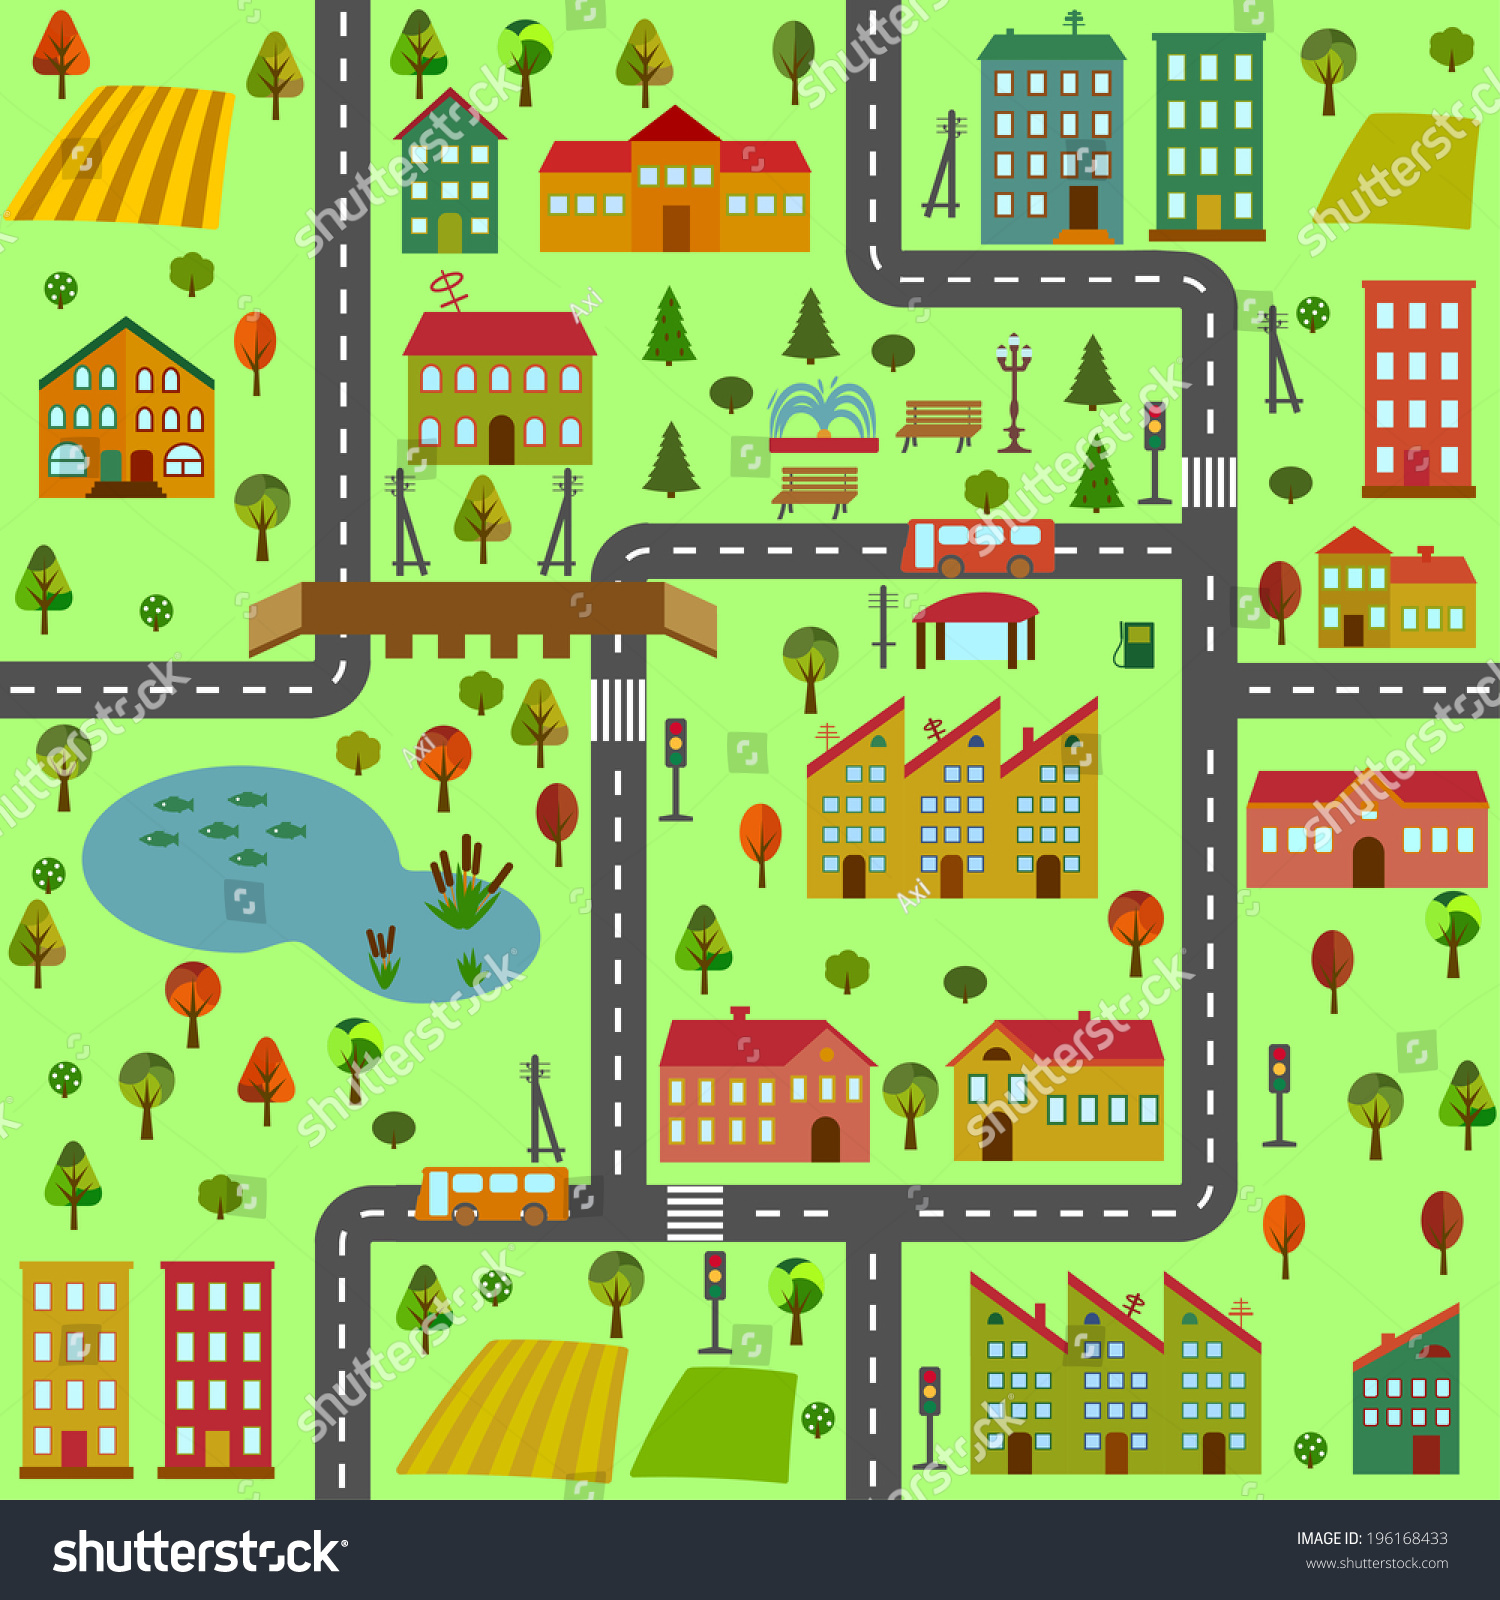 Cartoon Illustration Map City Different Houses Stock Vector 196168433